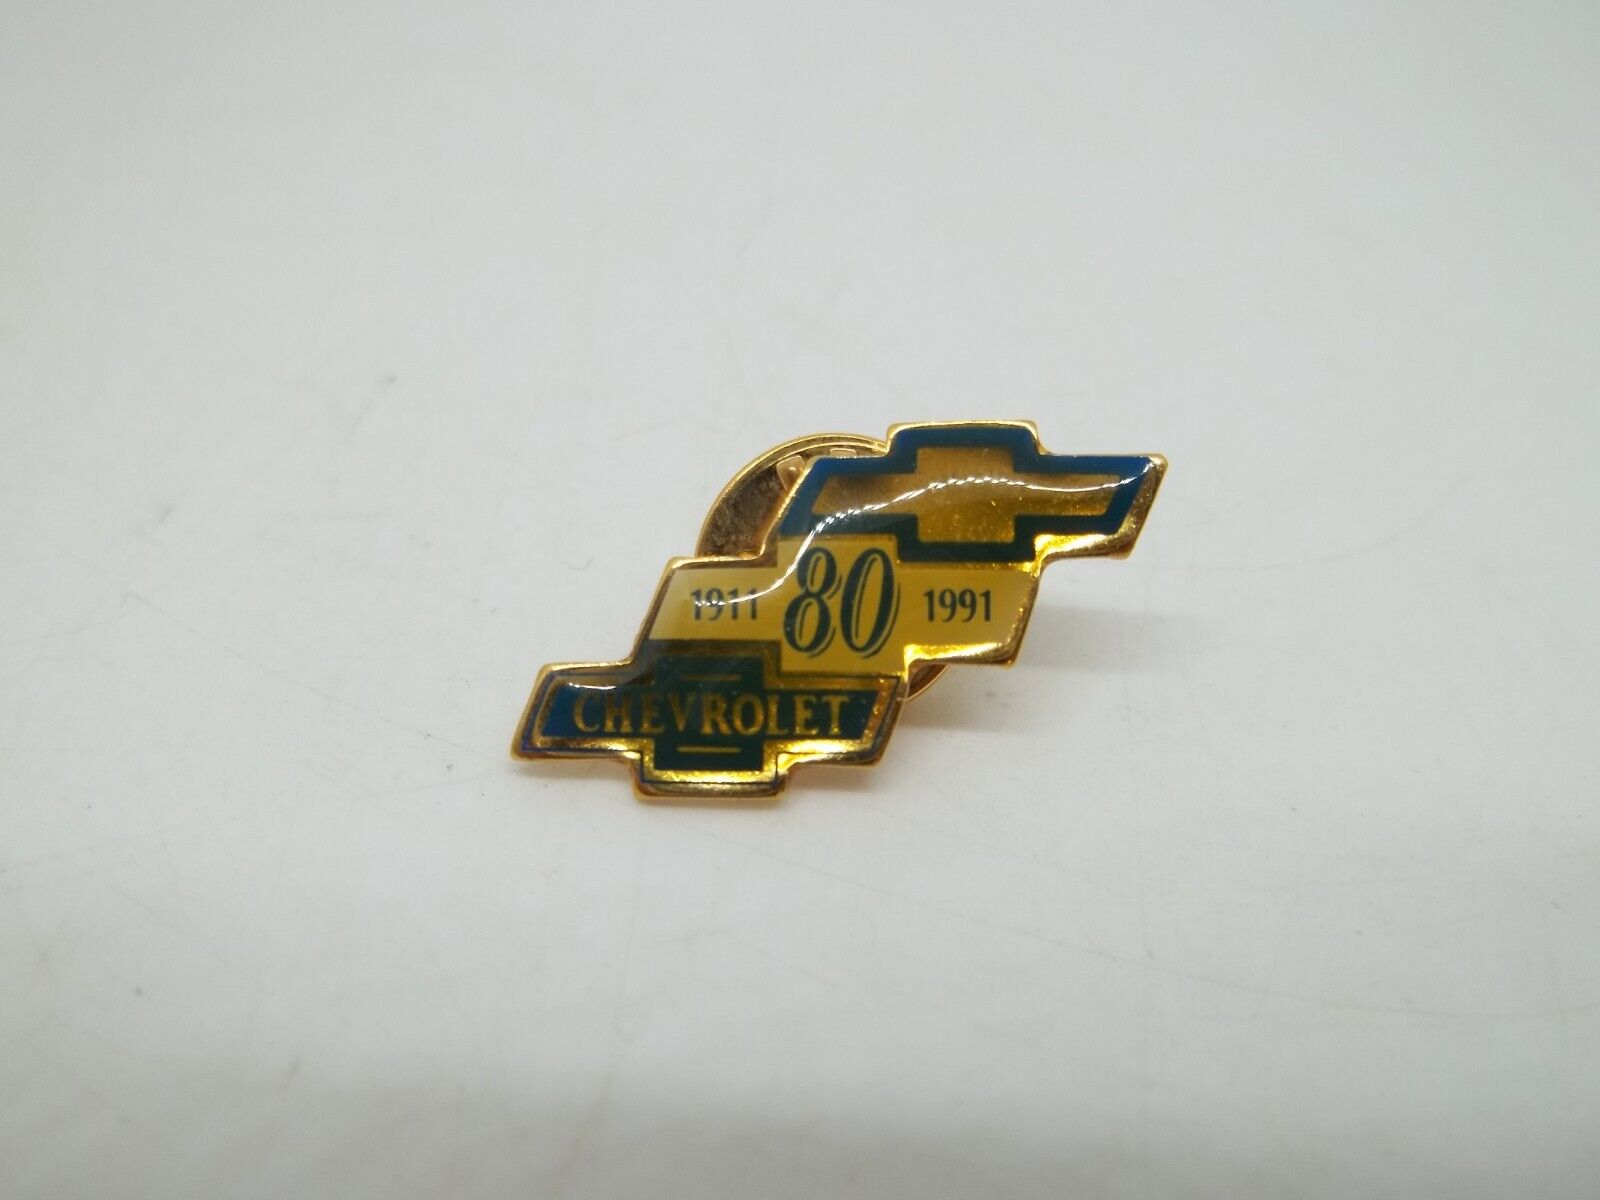 Chevrolet Bowtie 80 years 1911 to 1991 Lapel Pin Tie Tack Hat Pin Chevy